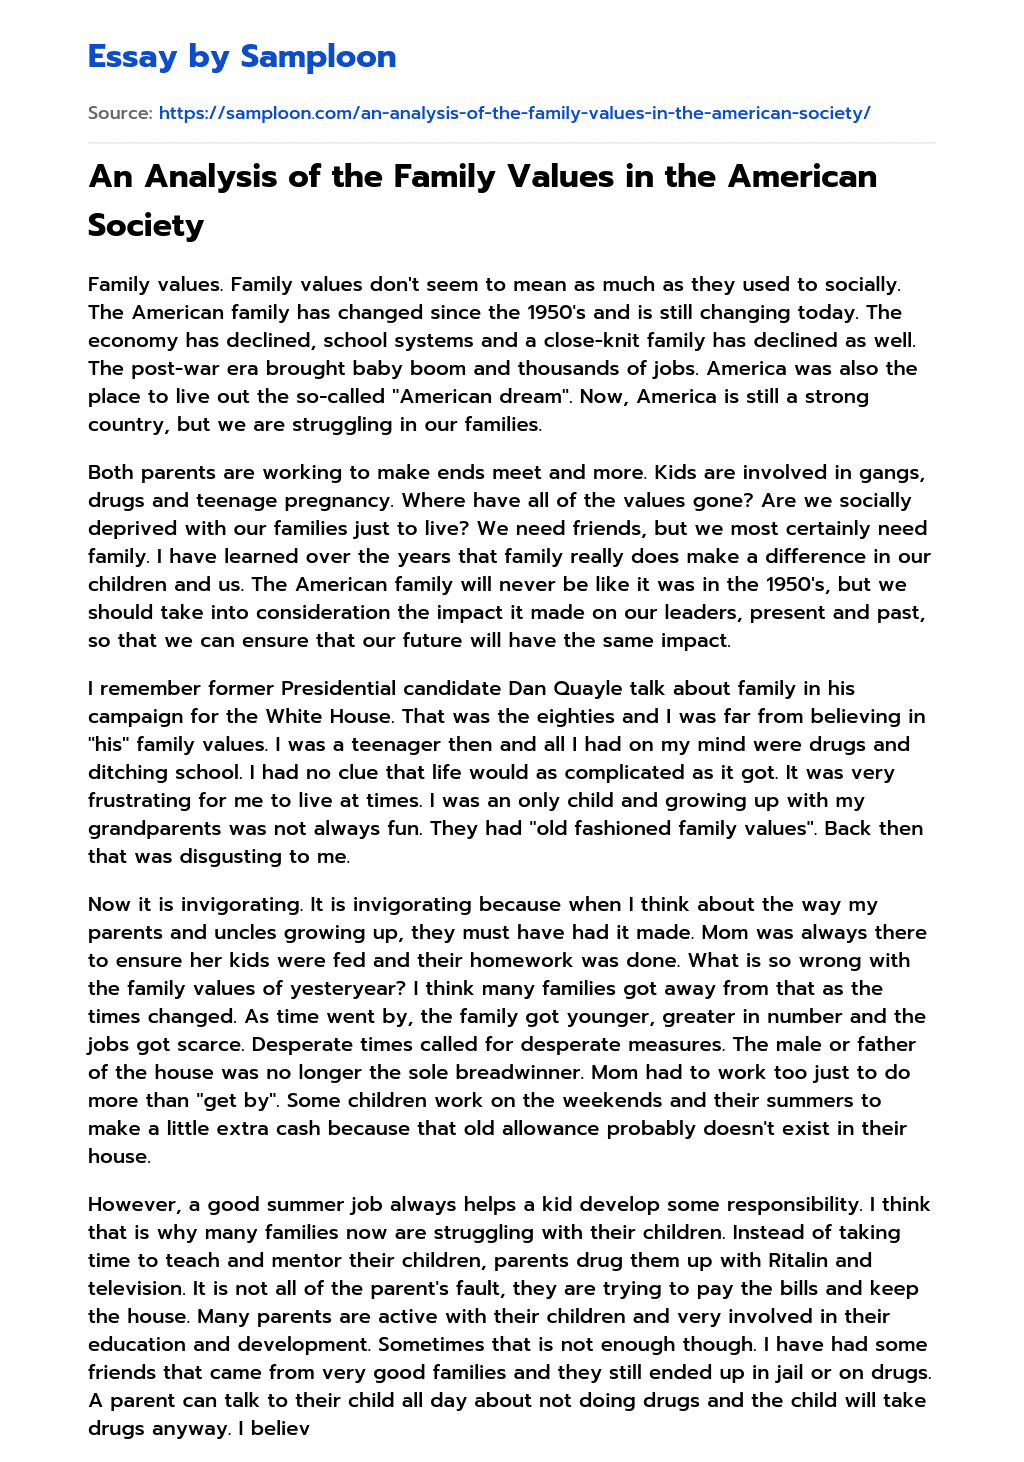 An Analysis of the Family Values in the American Society essay